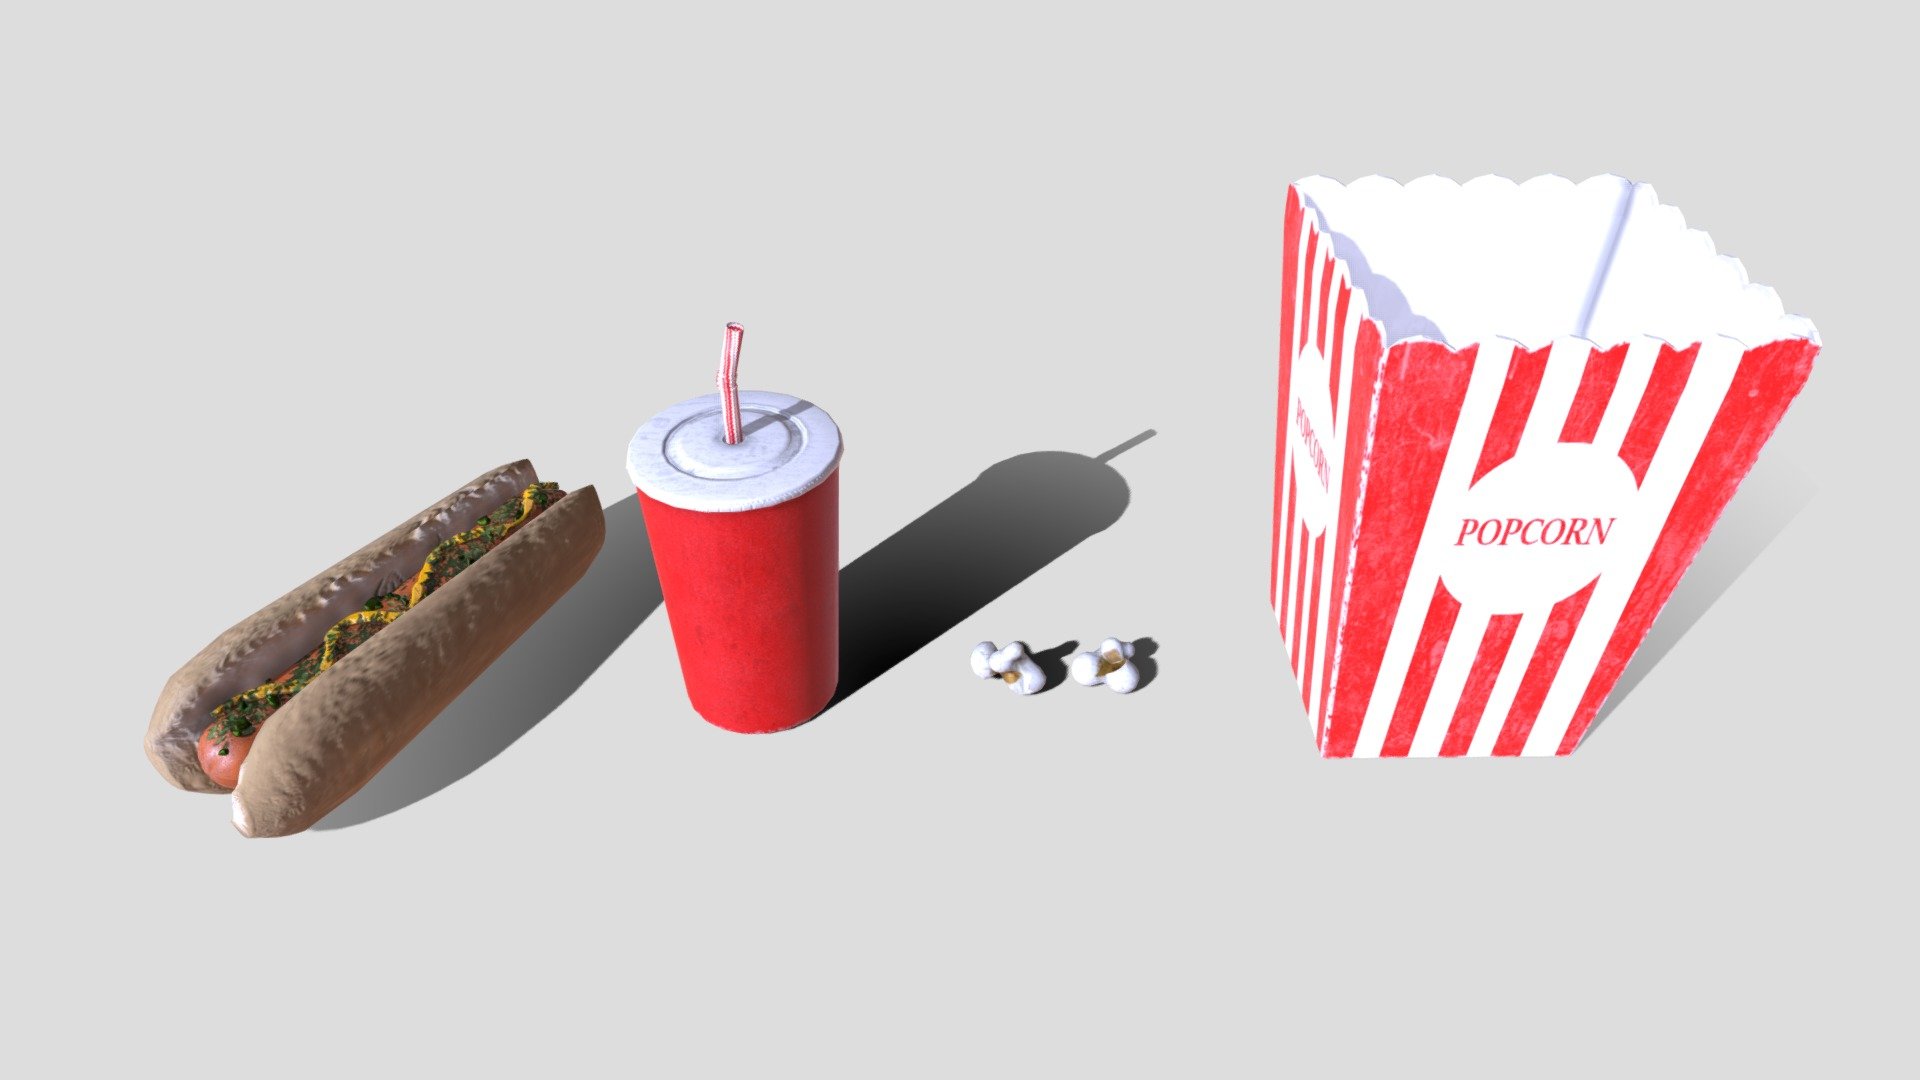 These are just a few fun little props you might find scattered around an occupied (or recently occupied) movie theater. 

We've got a soda, a few versions of popcorn, and a popcorn box. You can of course use the two popcorns and populate a layer in the box to simulate popcorn box with popcorn in it!

Hope you enjoy this free asset. Use as you like 3d model